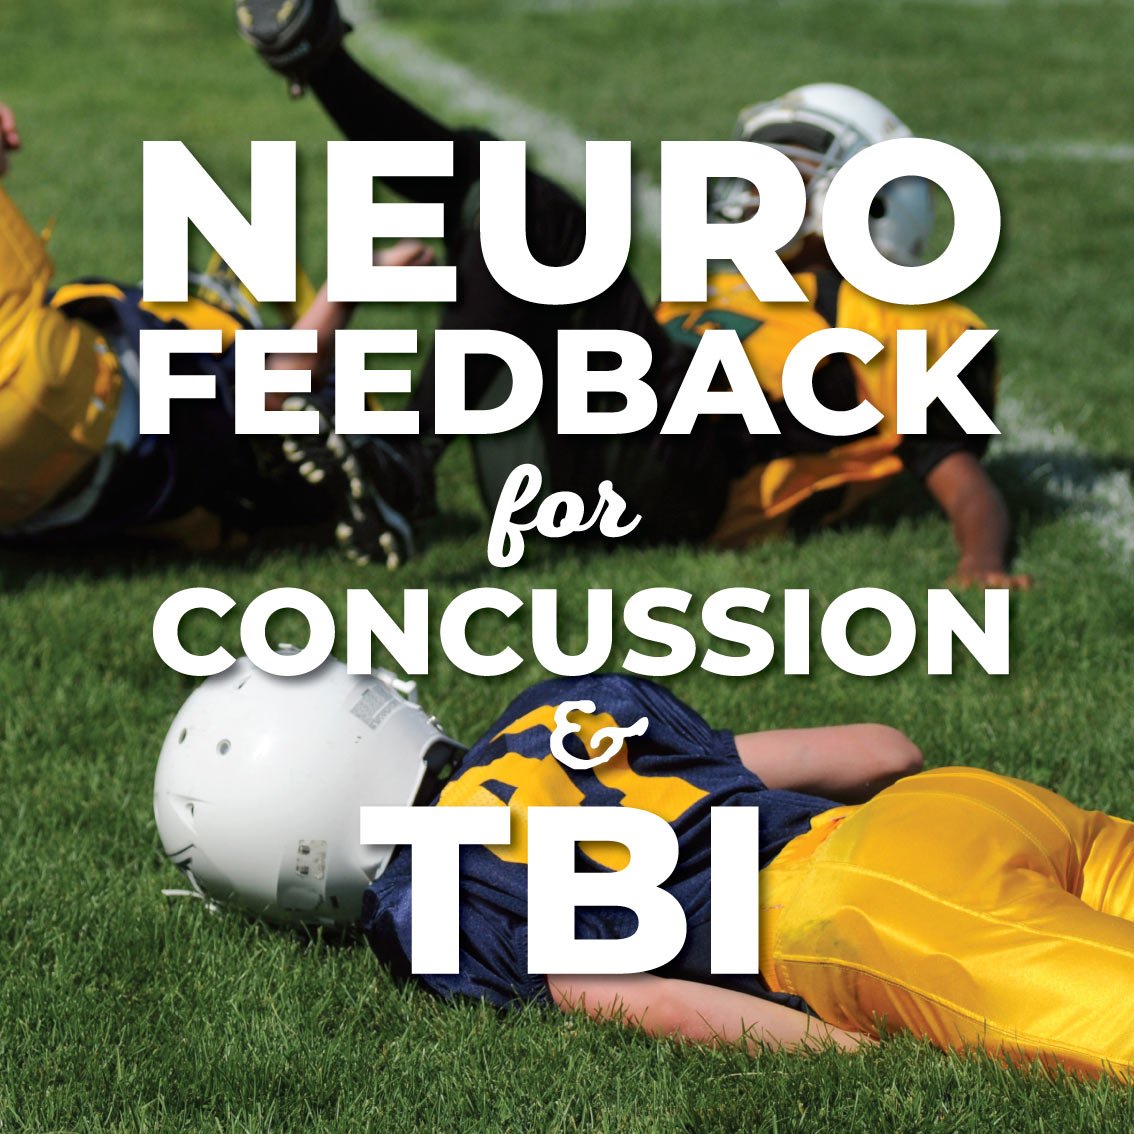 Does neurofeedback work for concussions?